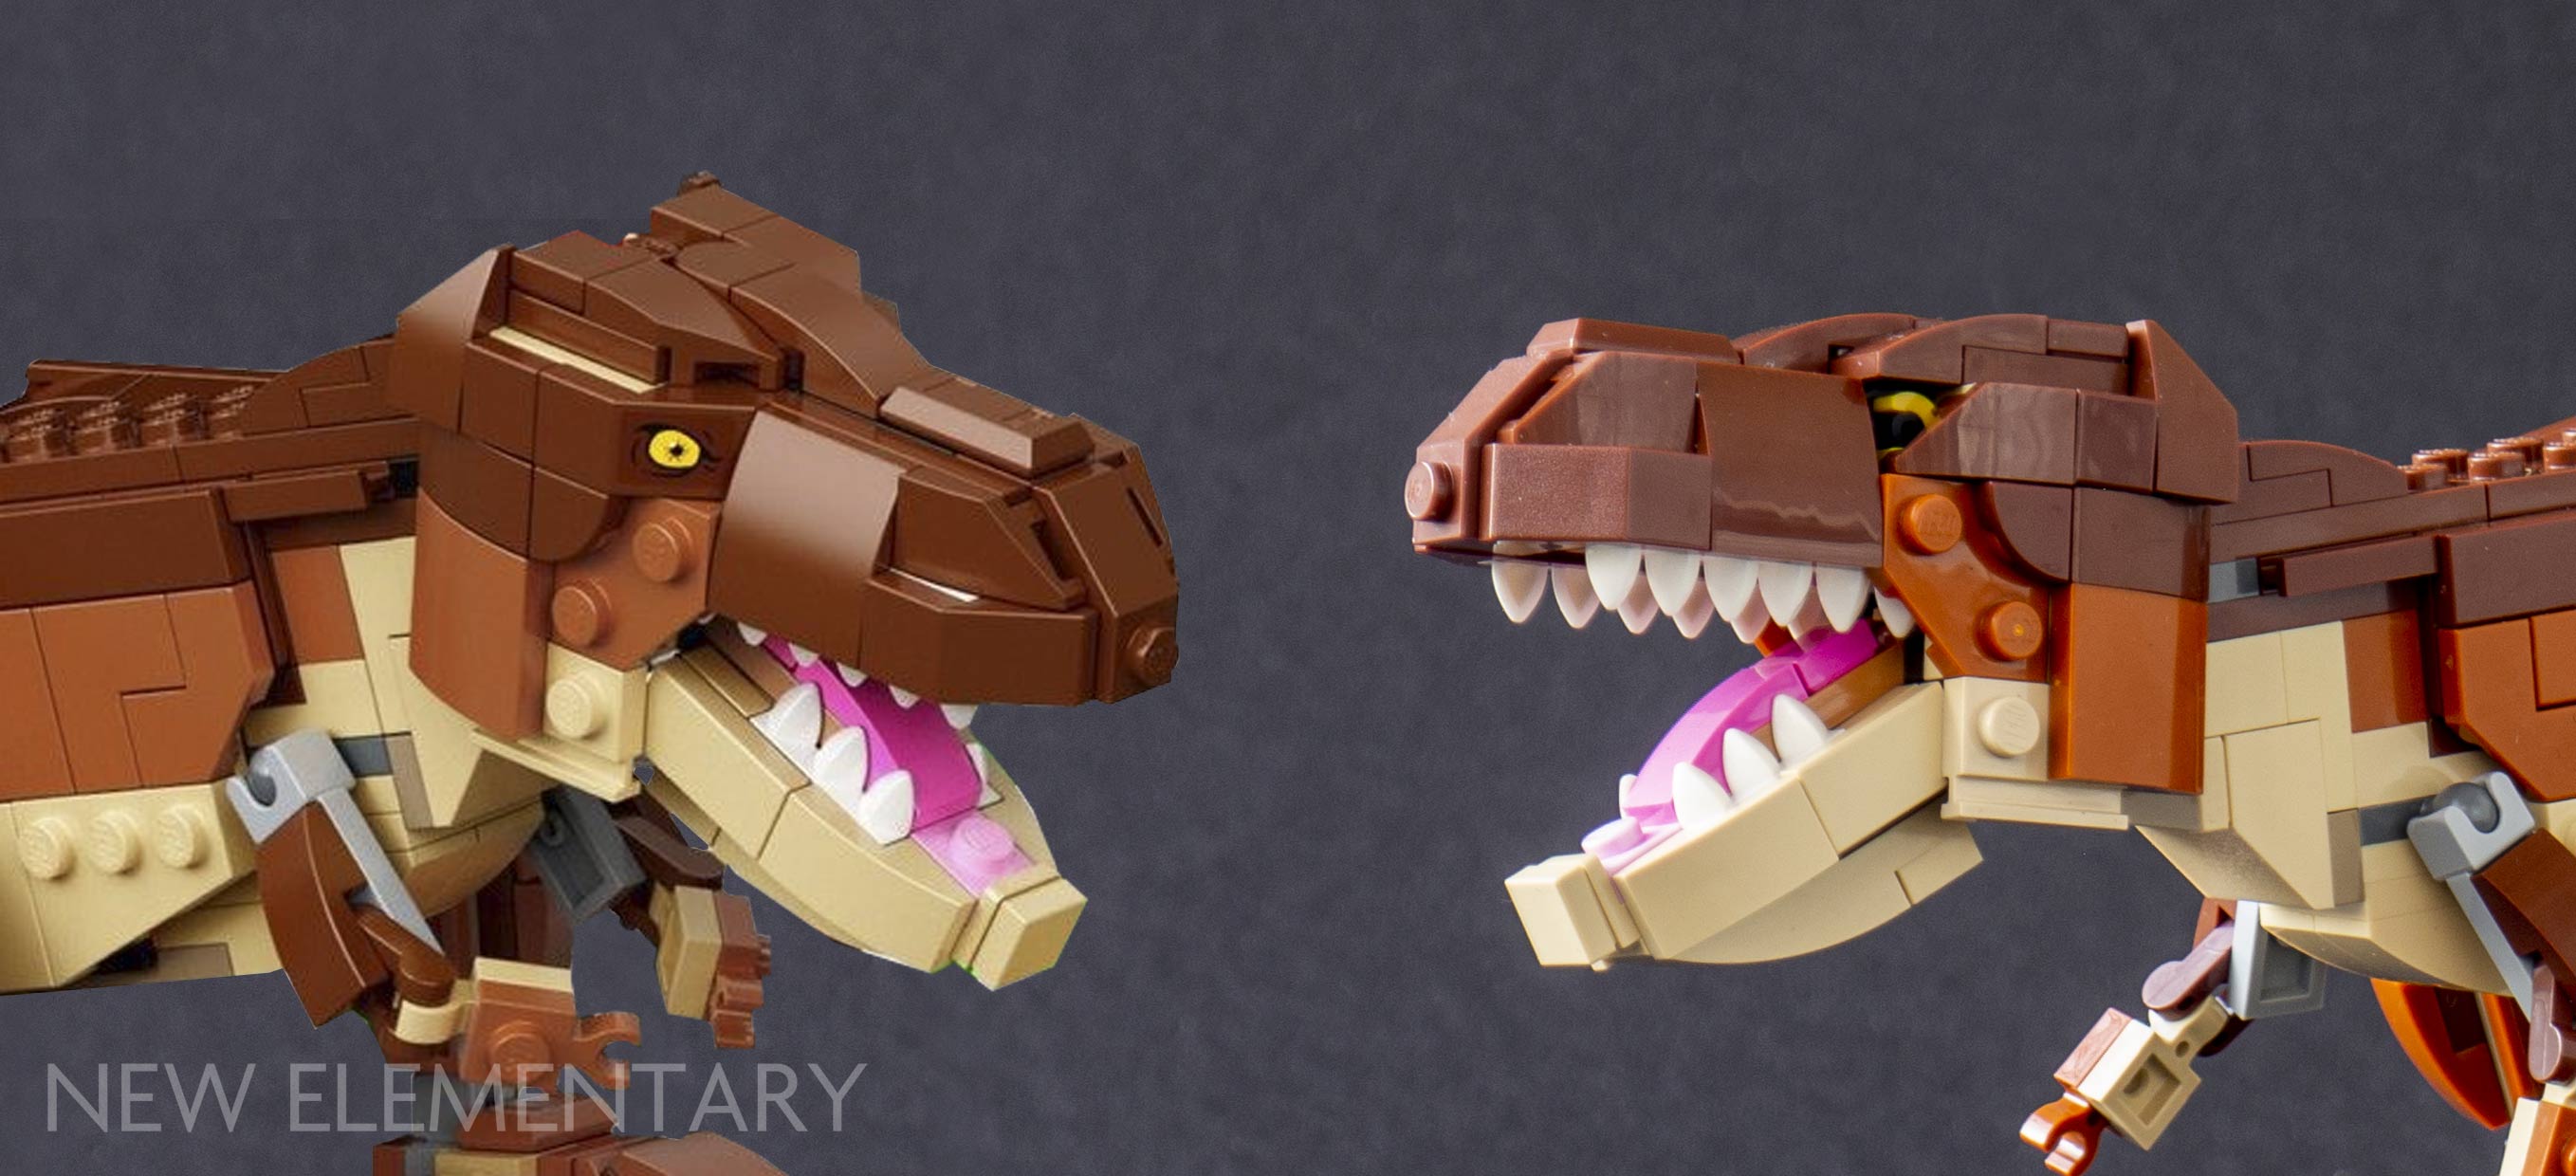 Breakout parts, techniques Elementary: New rex 76956 LEGO® and World sets T. Jurassic review: | LEGO®